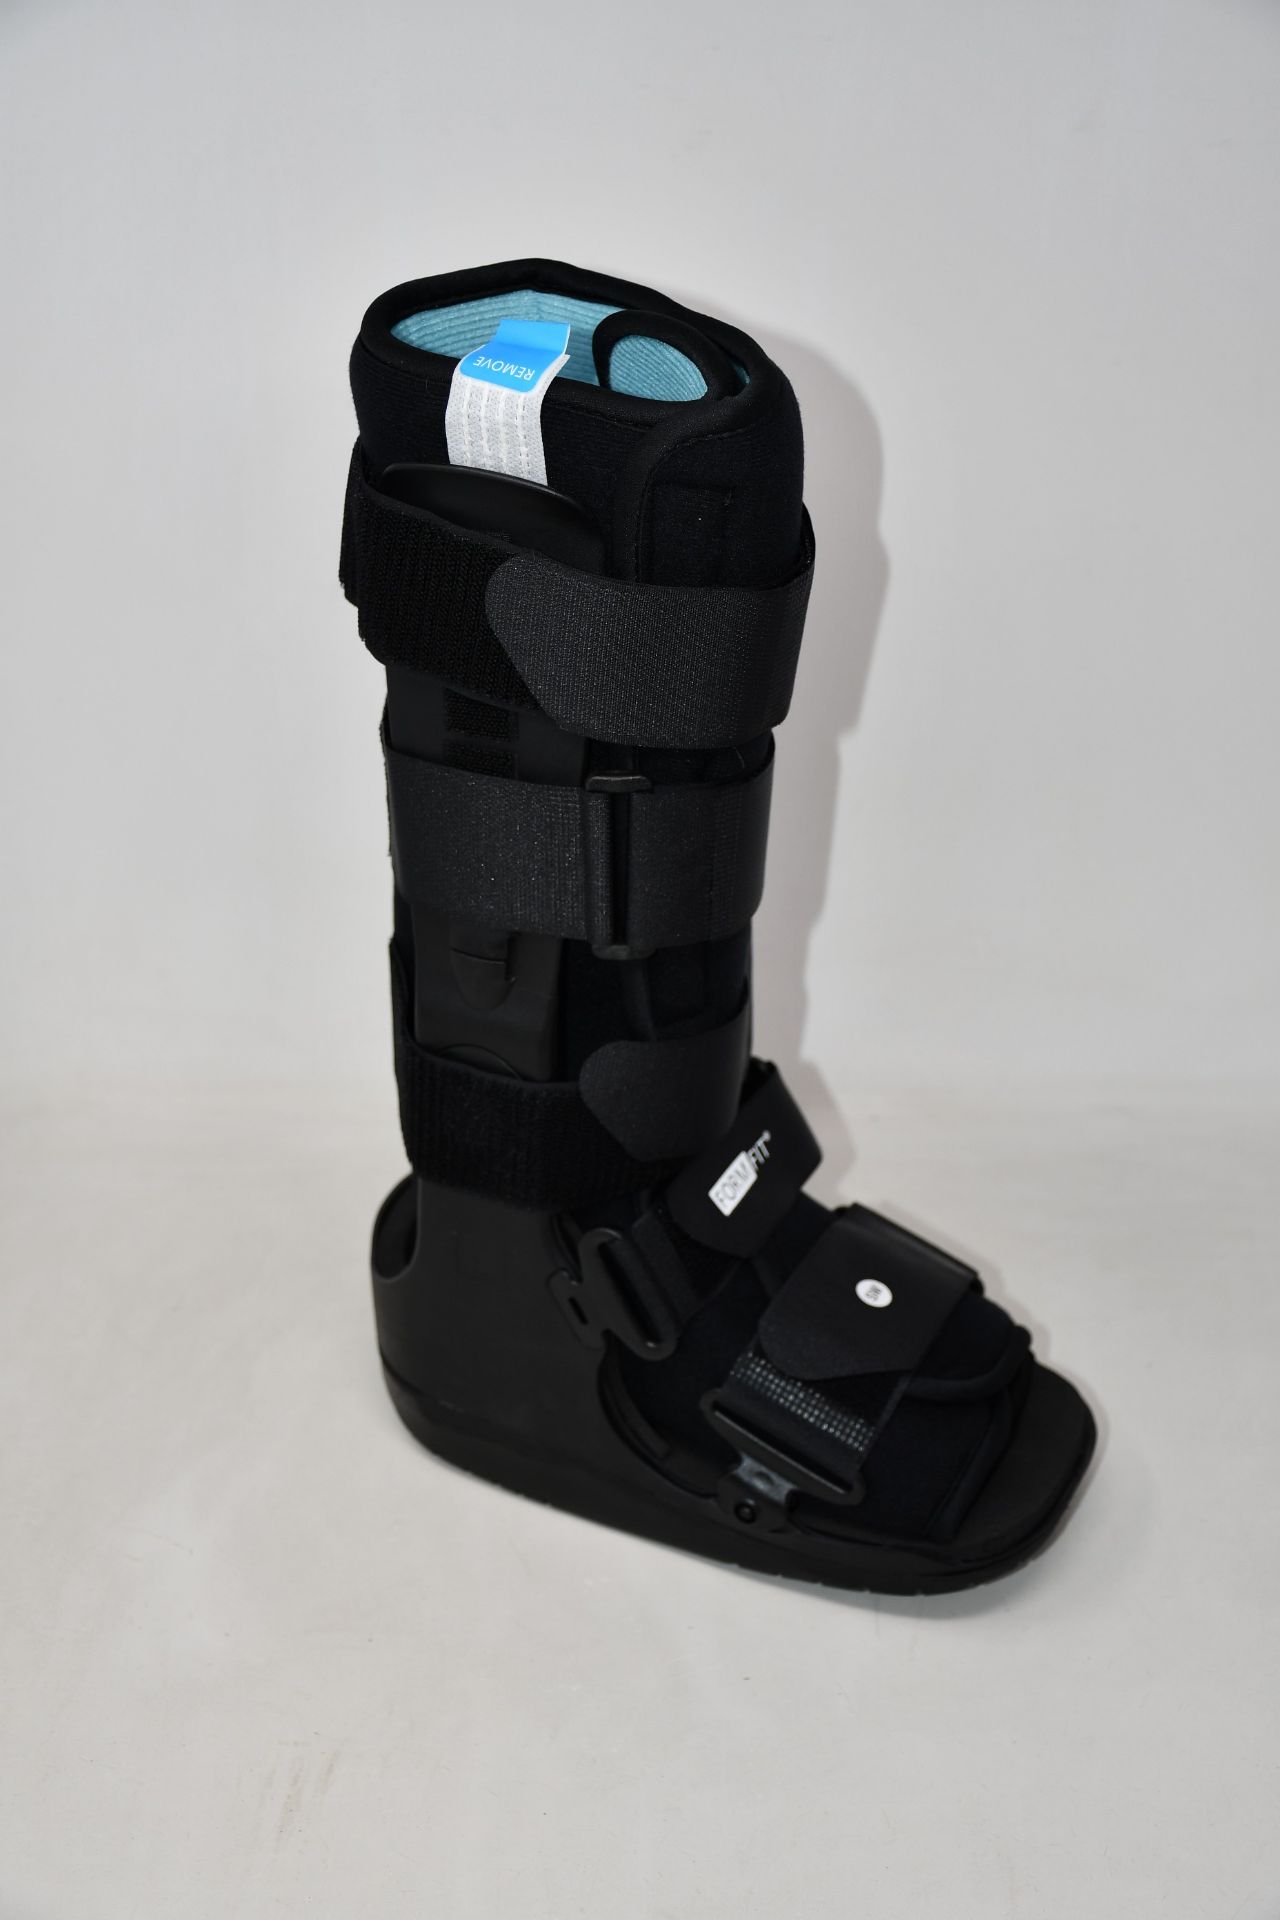 Eight as new Ossur Form Fit Walkers in black (Small).